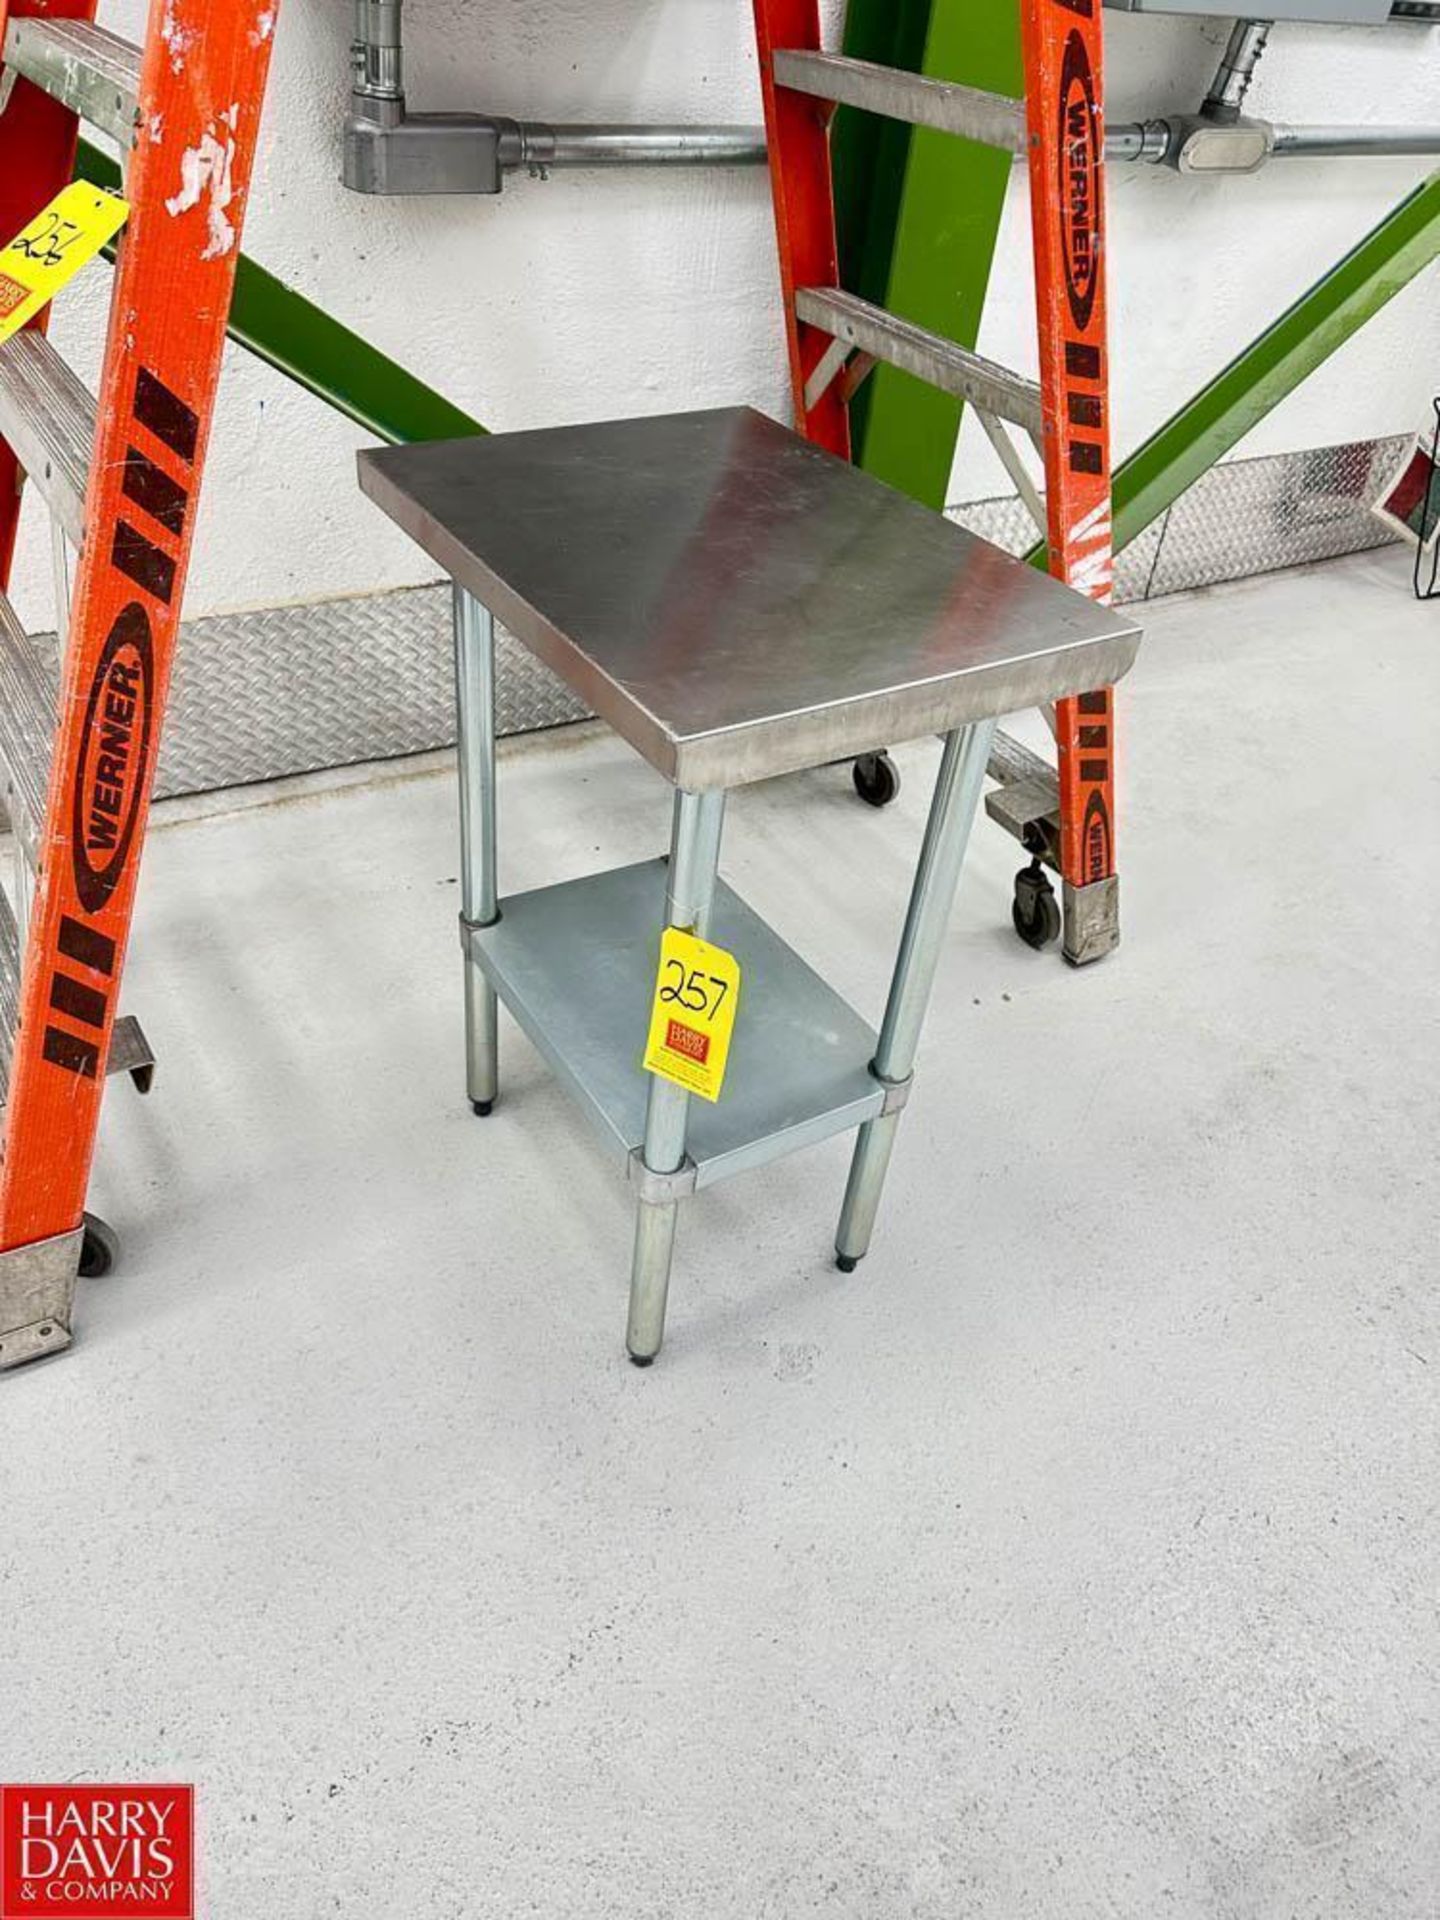 Regency S/S Work Table with Undershelf, Dimensions = 24" x 18" - Rigging Fee: $35 - Image 2 of 2